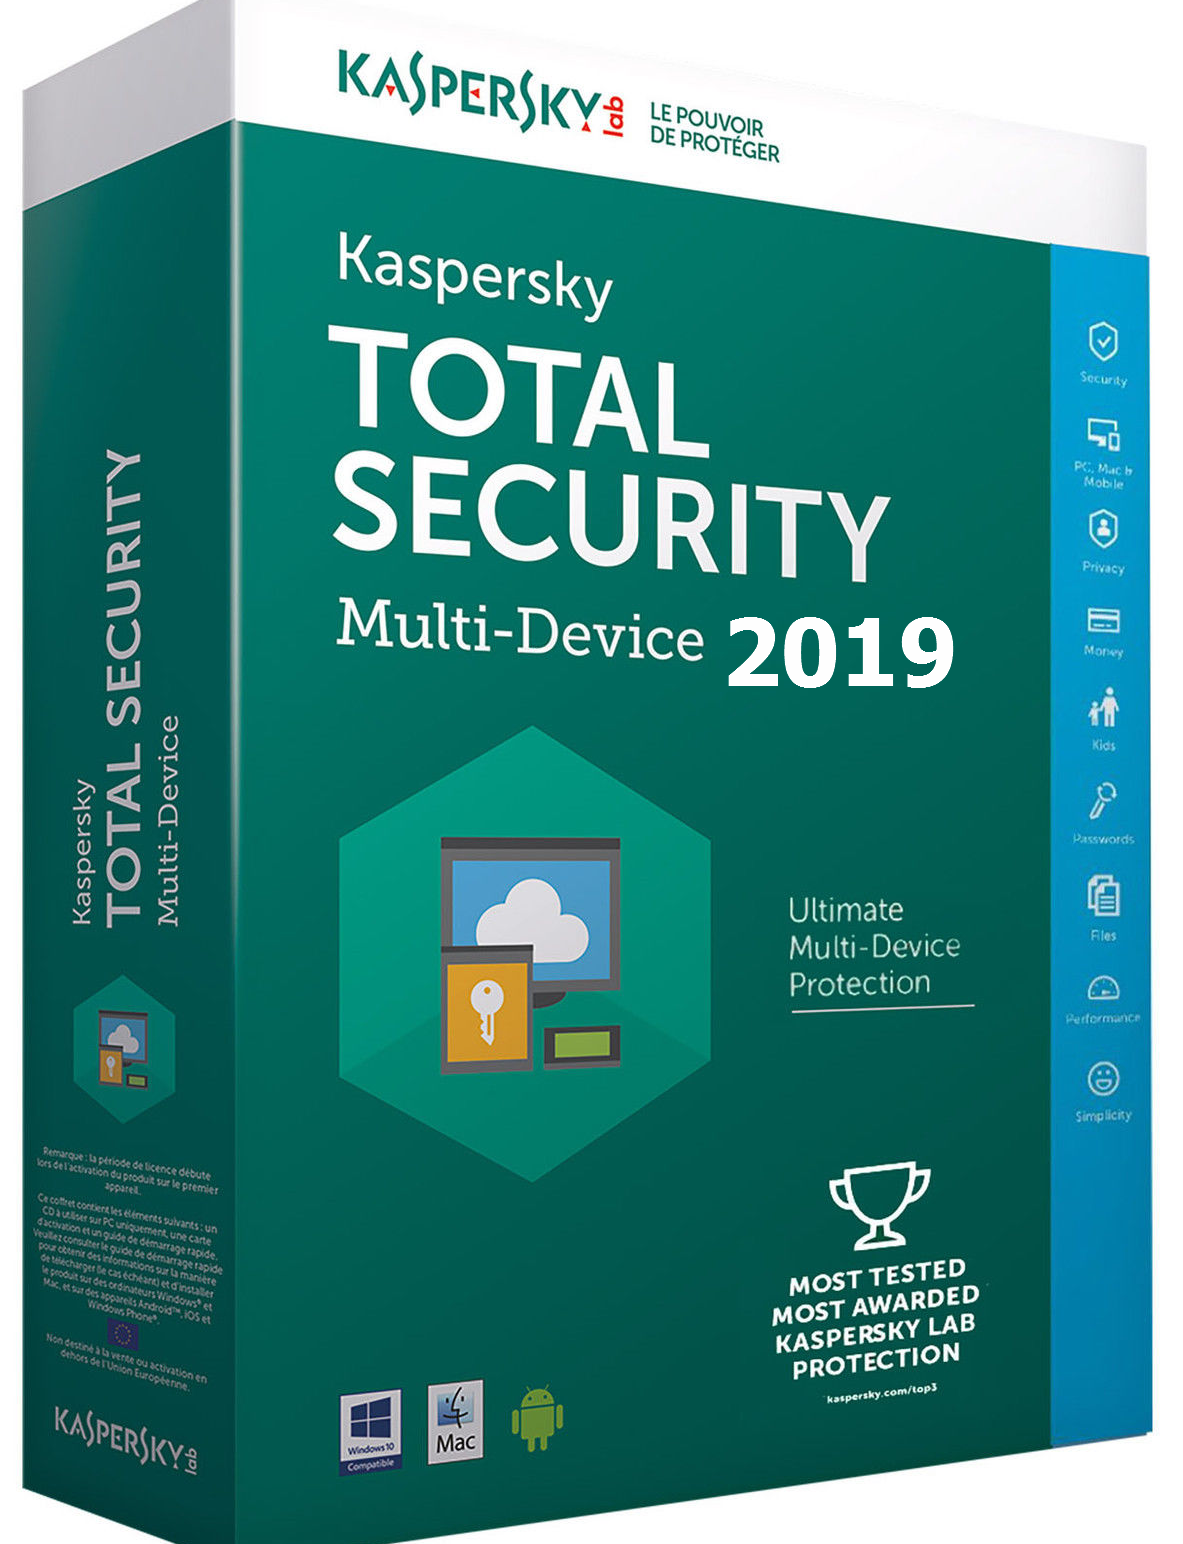 Kaspersky Total Security 2020 Activation Code Free